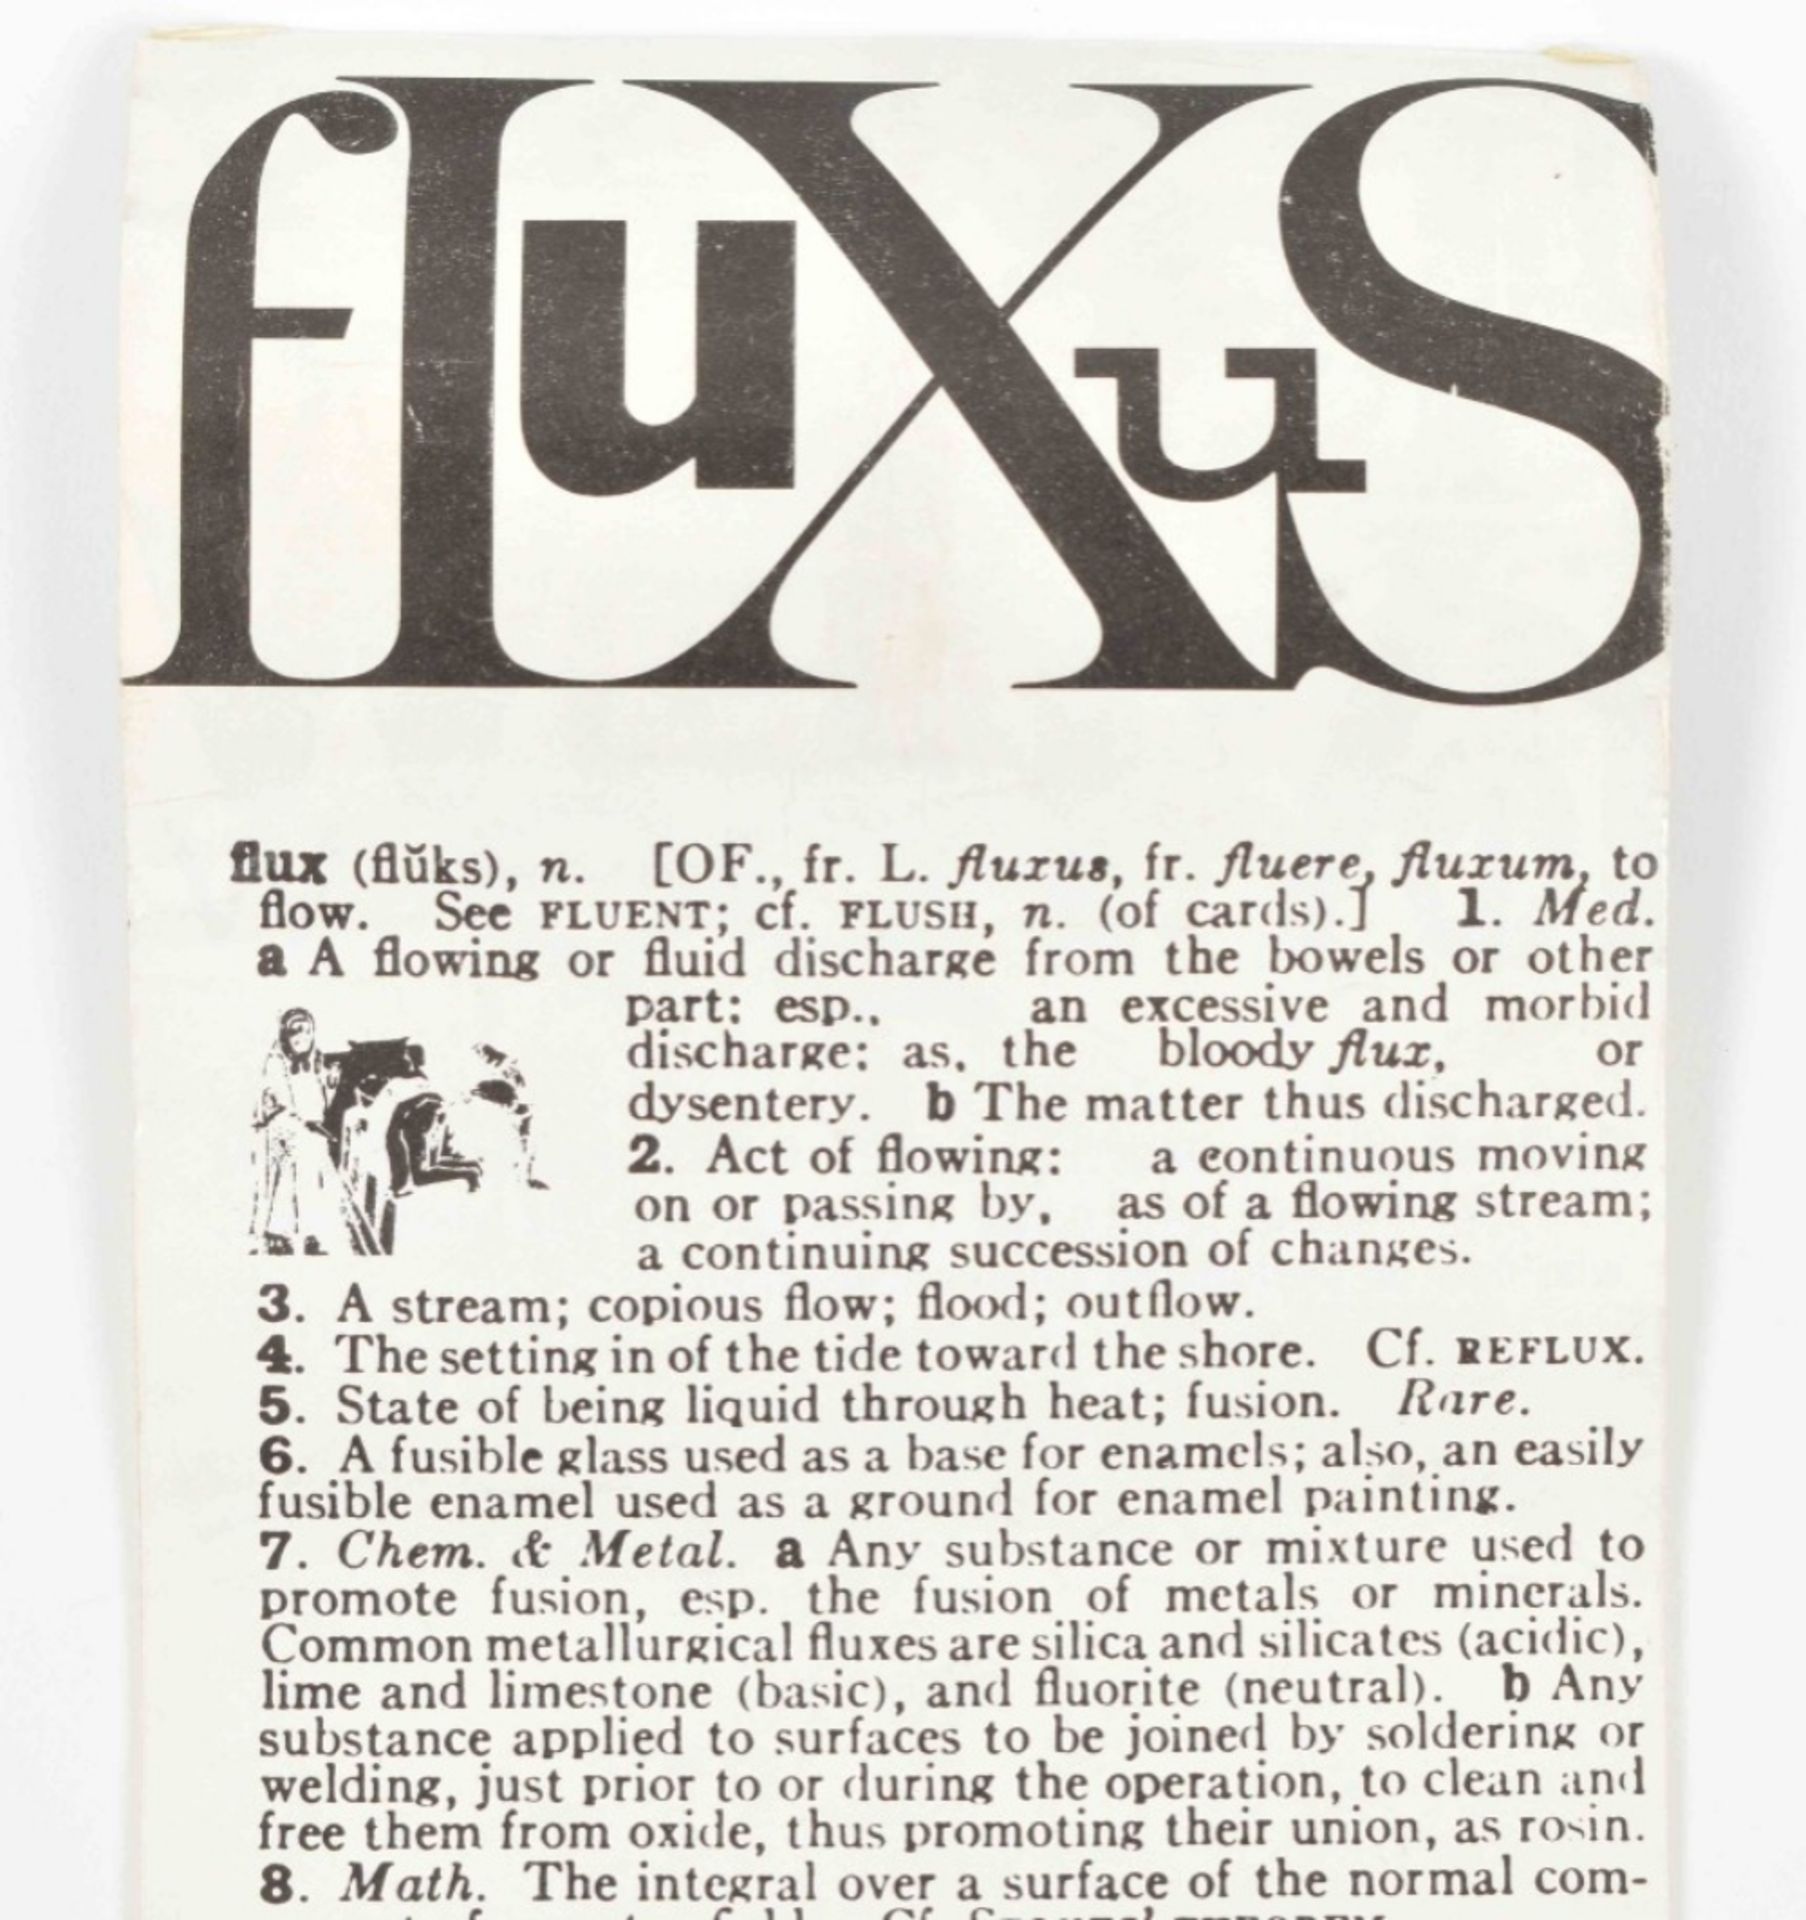 Fluxus Preview Review, 1963 - Image 5 of 7